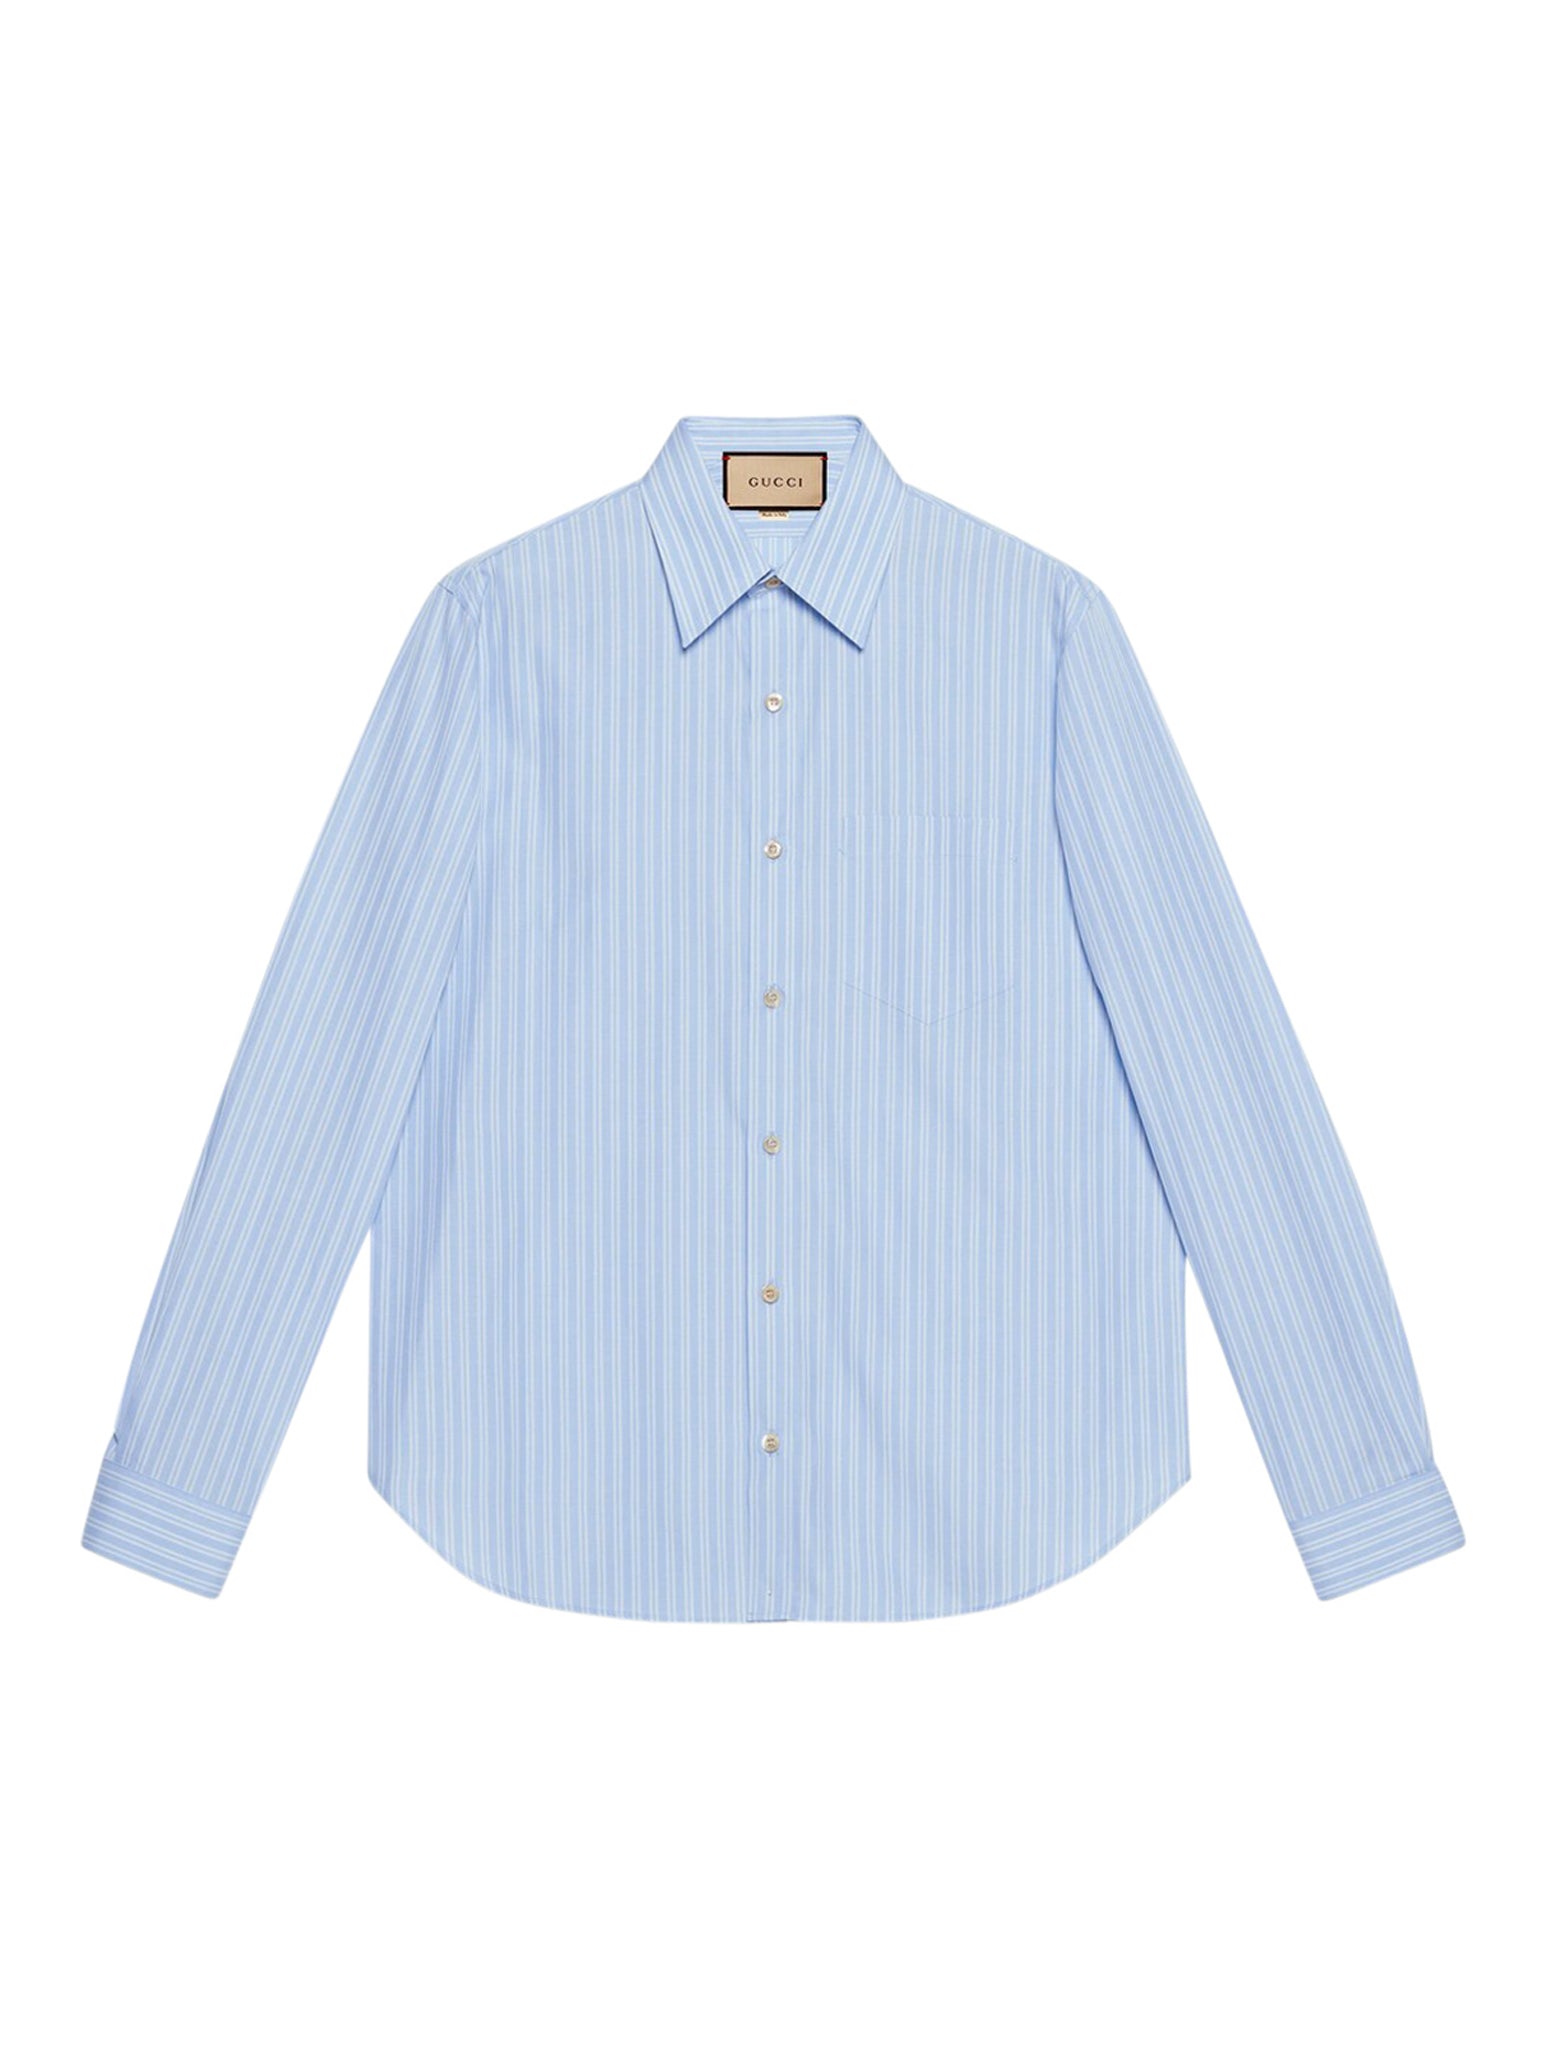 Striped cotton shirt with pocket